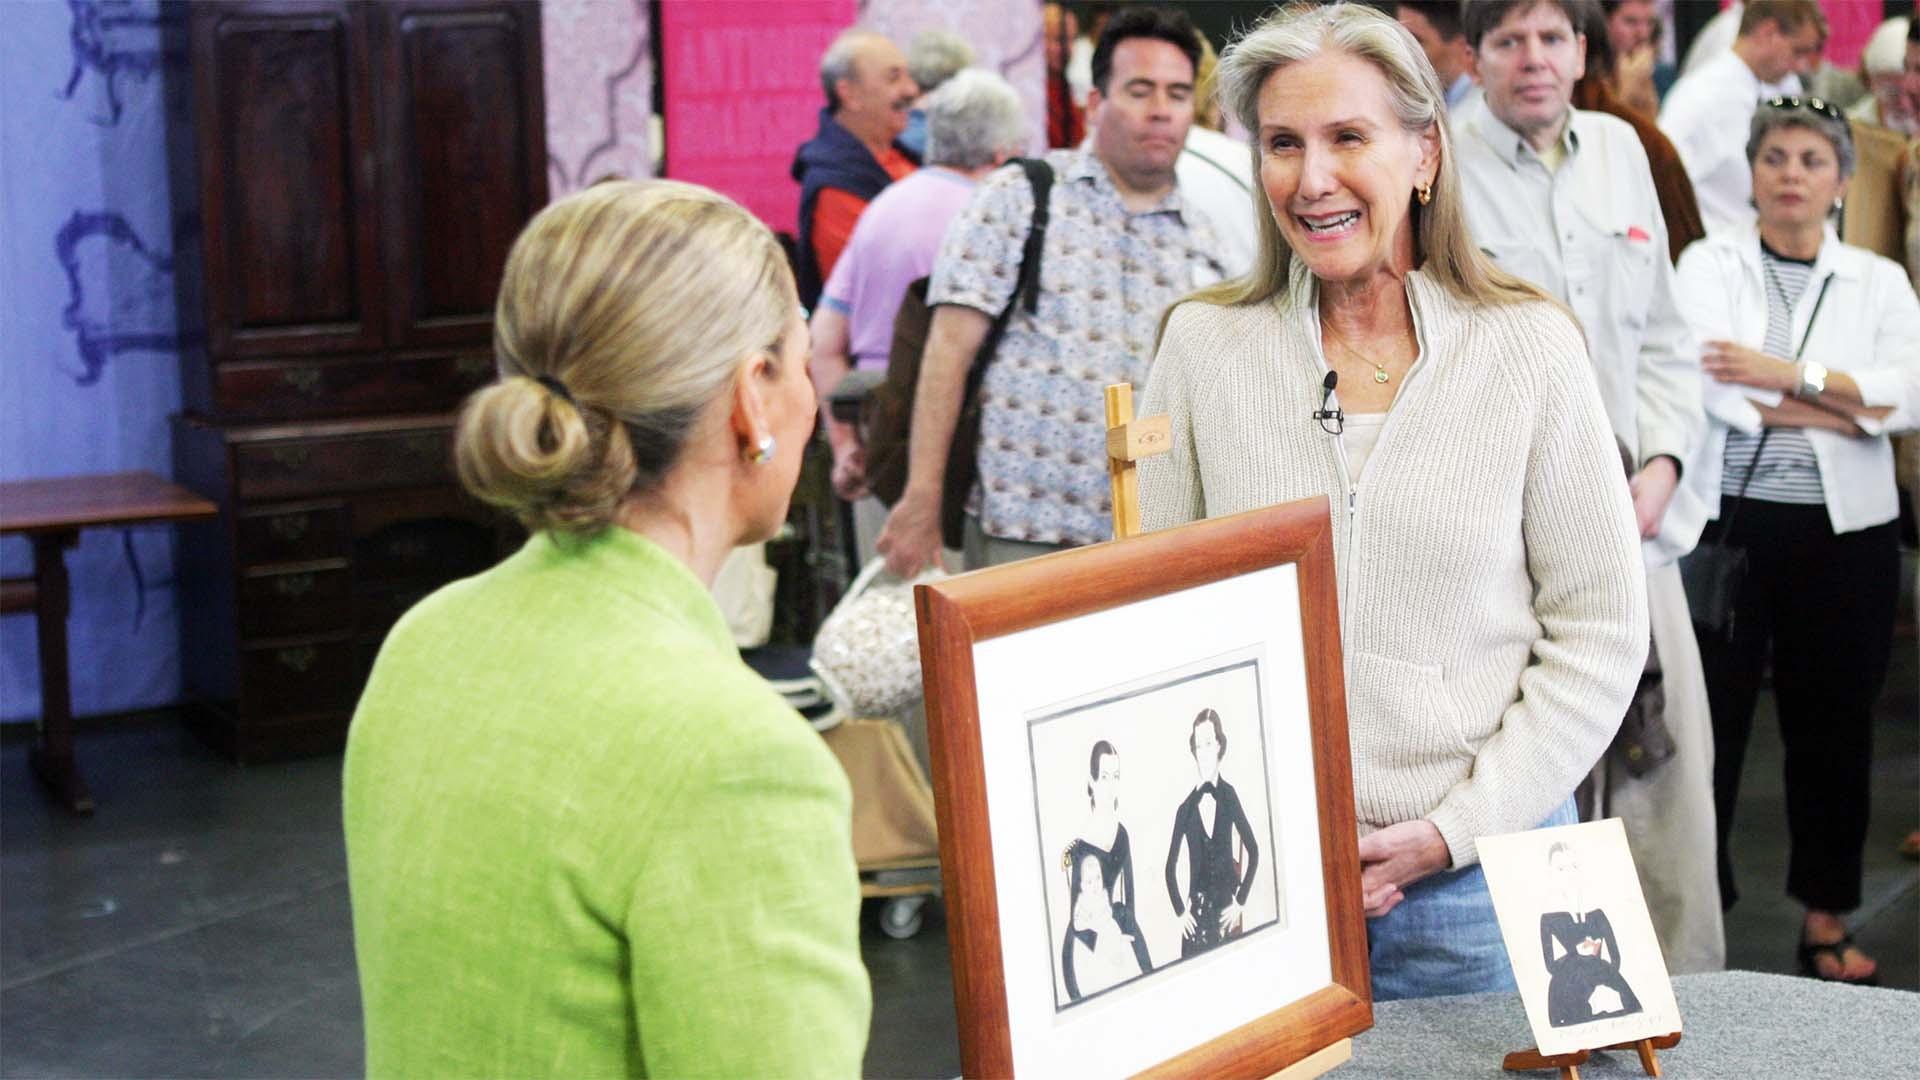 scene from Antiques Roadshow